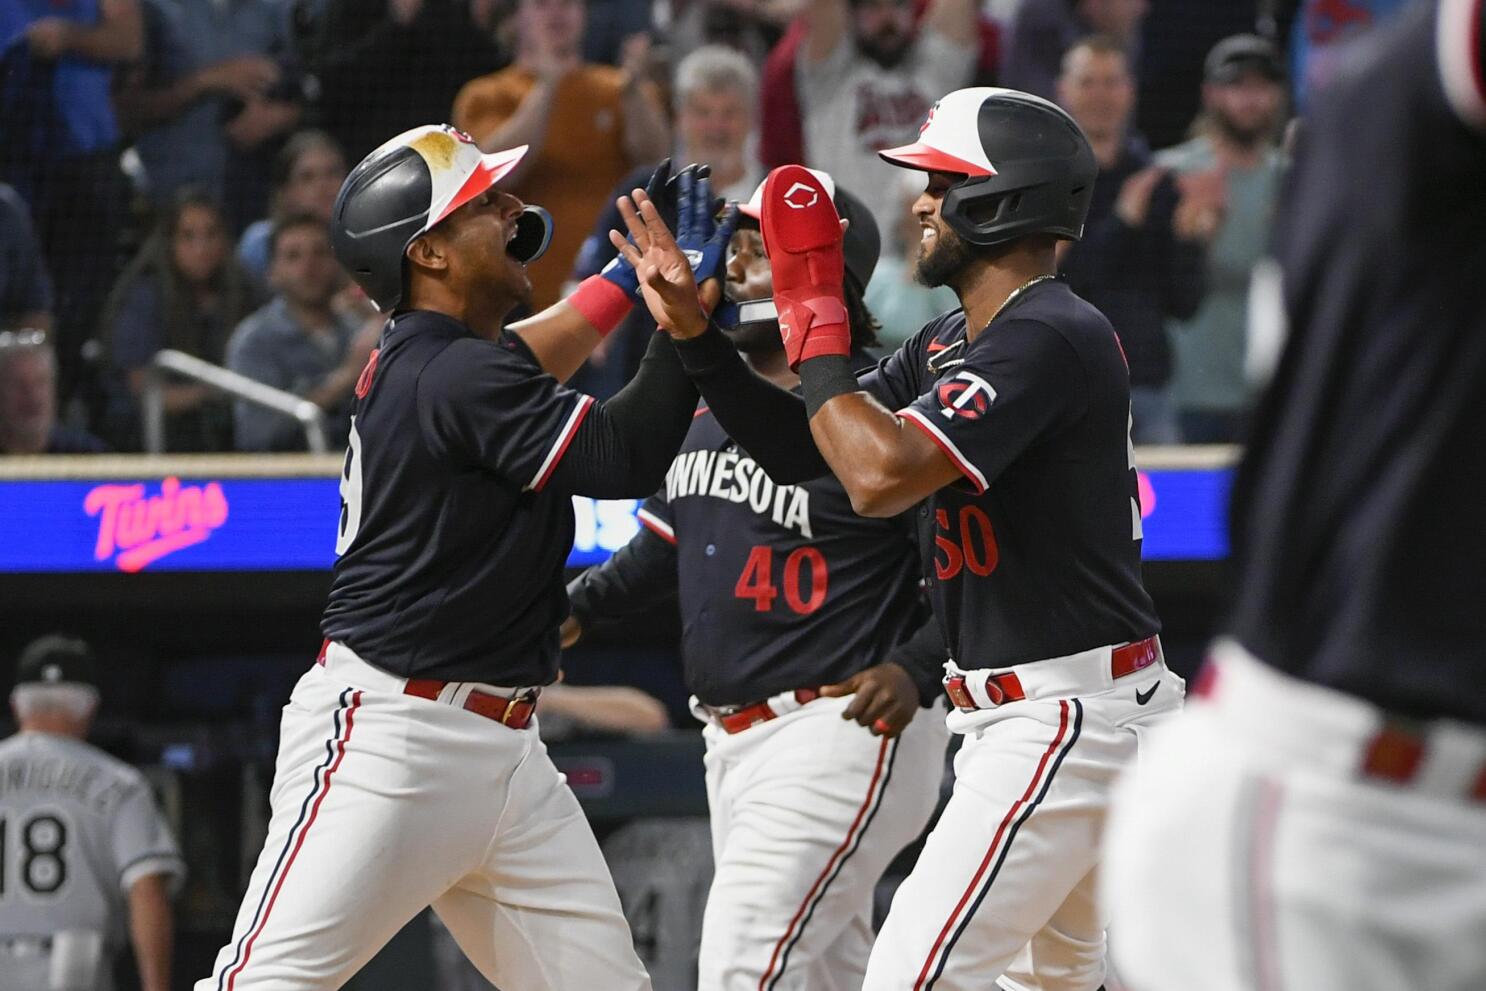 Twins battle back, then fall short in 3-2 loss to White Sox in 10 innings